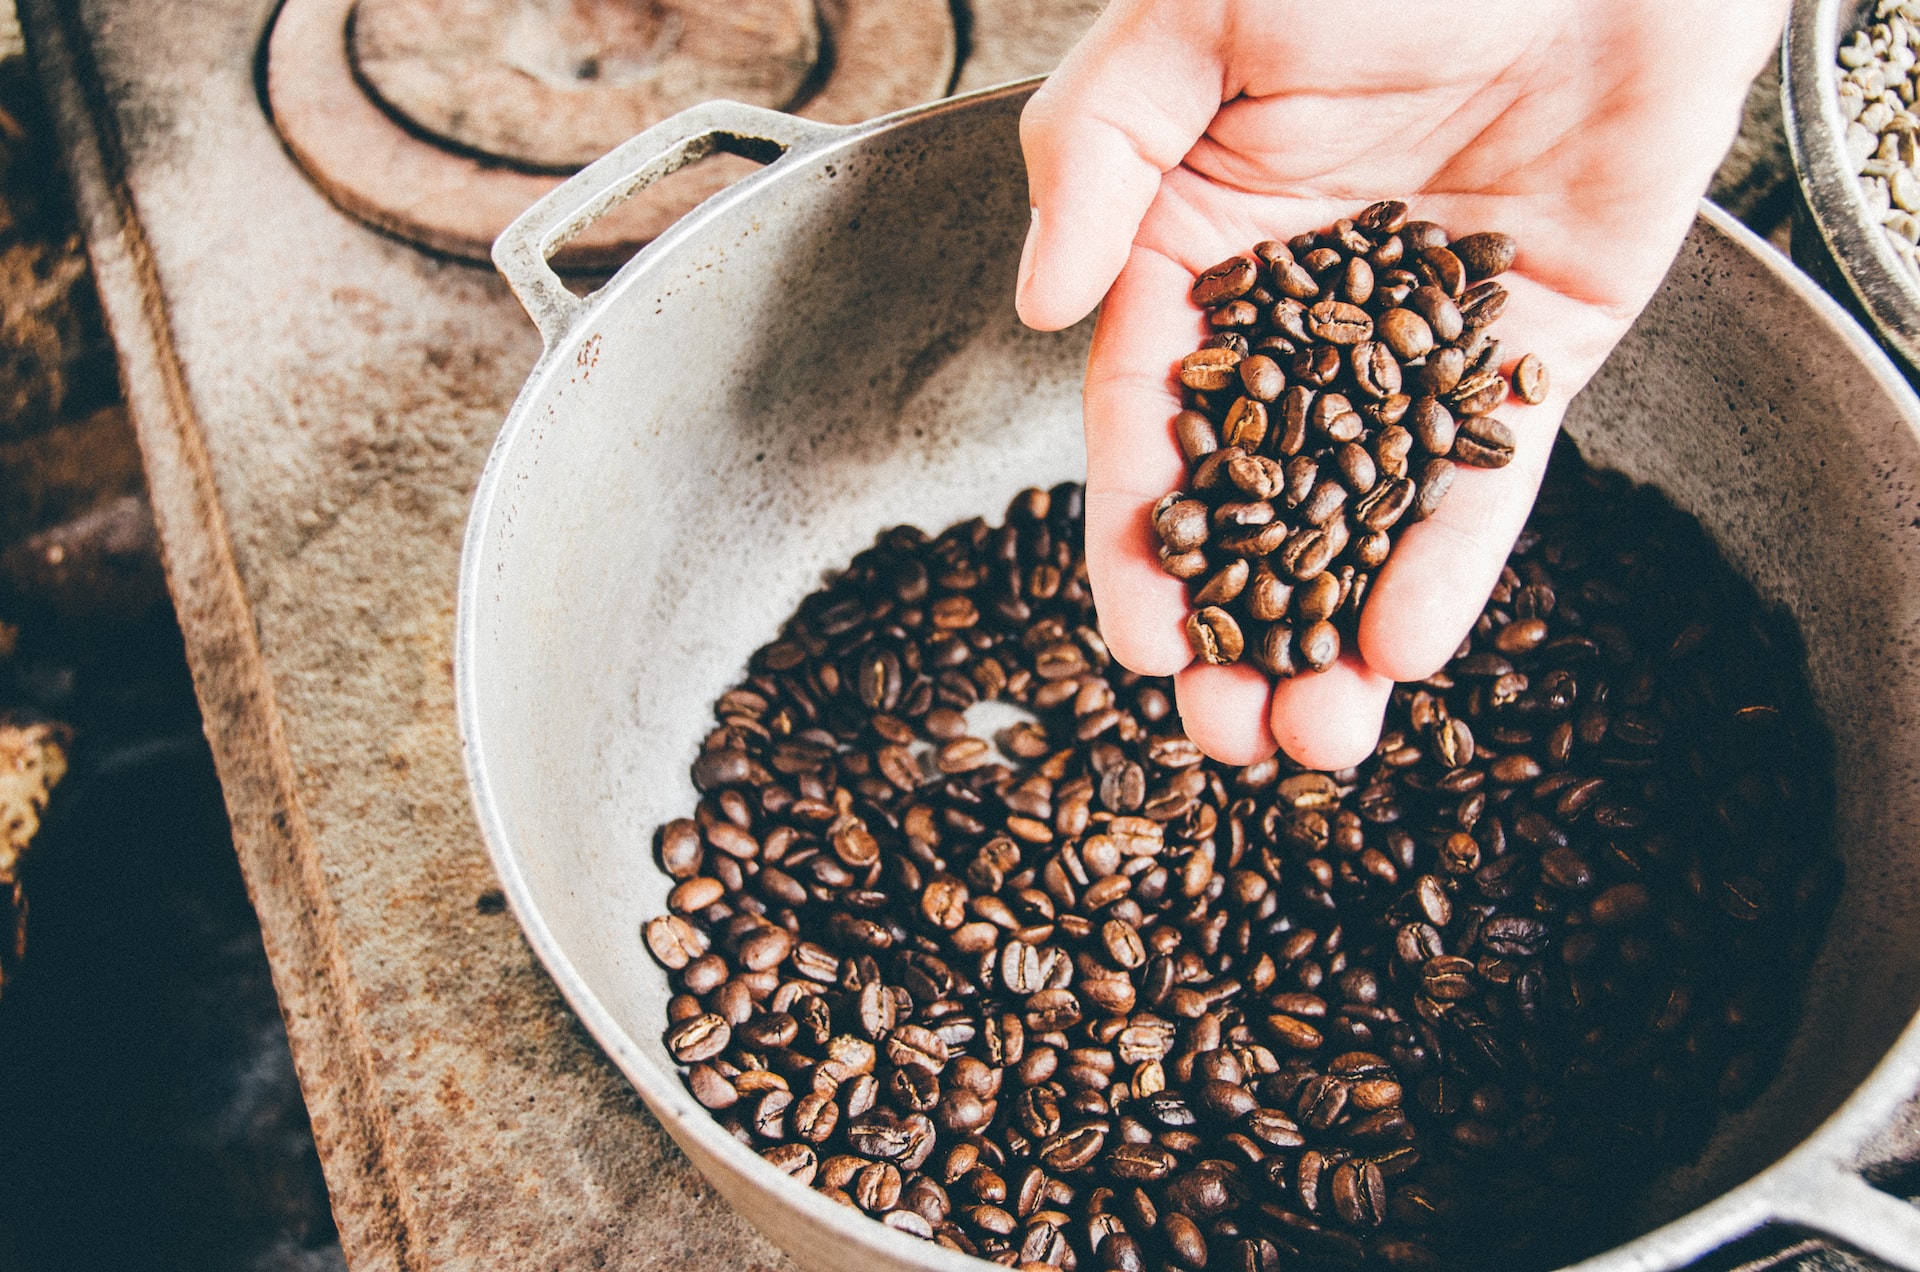 An image showing a hand showcasing roasted Costa Rican Arabica coffee beans on gray steel pan